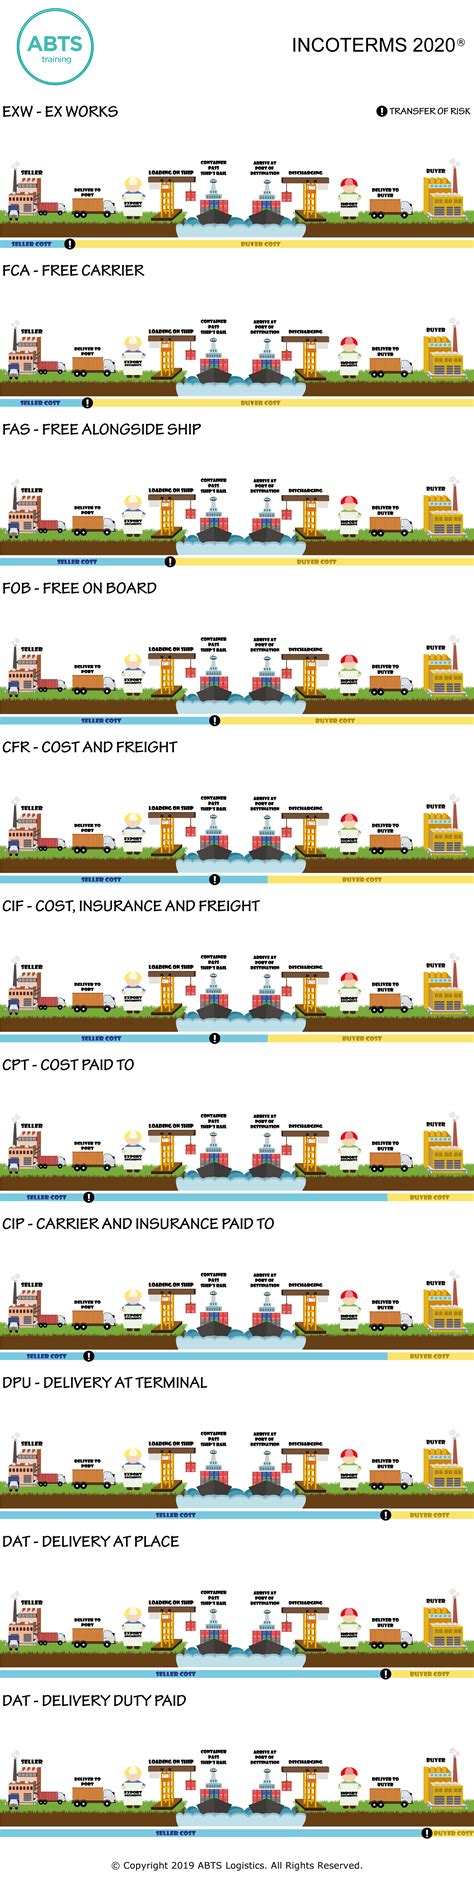 Incoterms 2020 Infographic